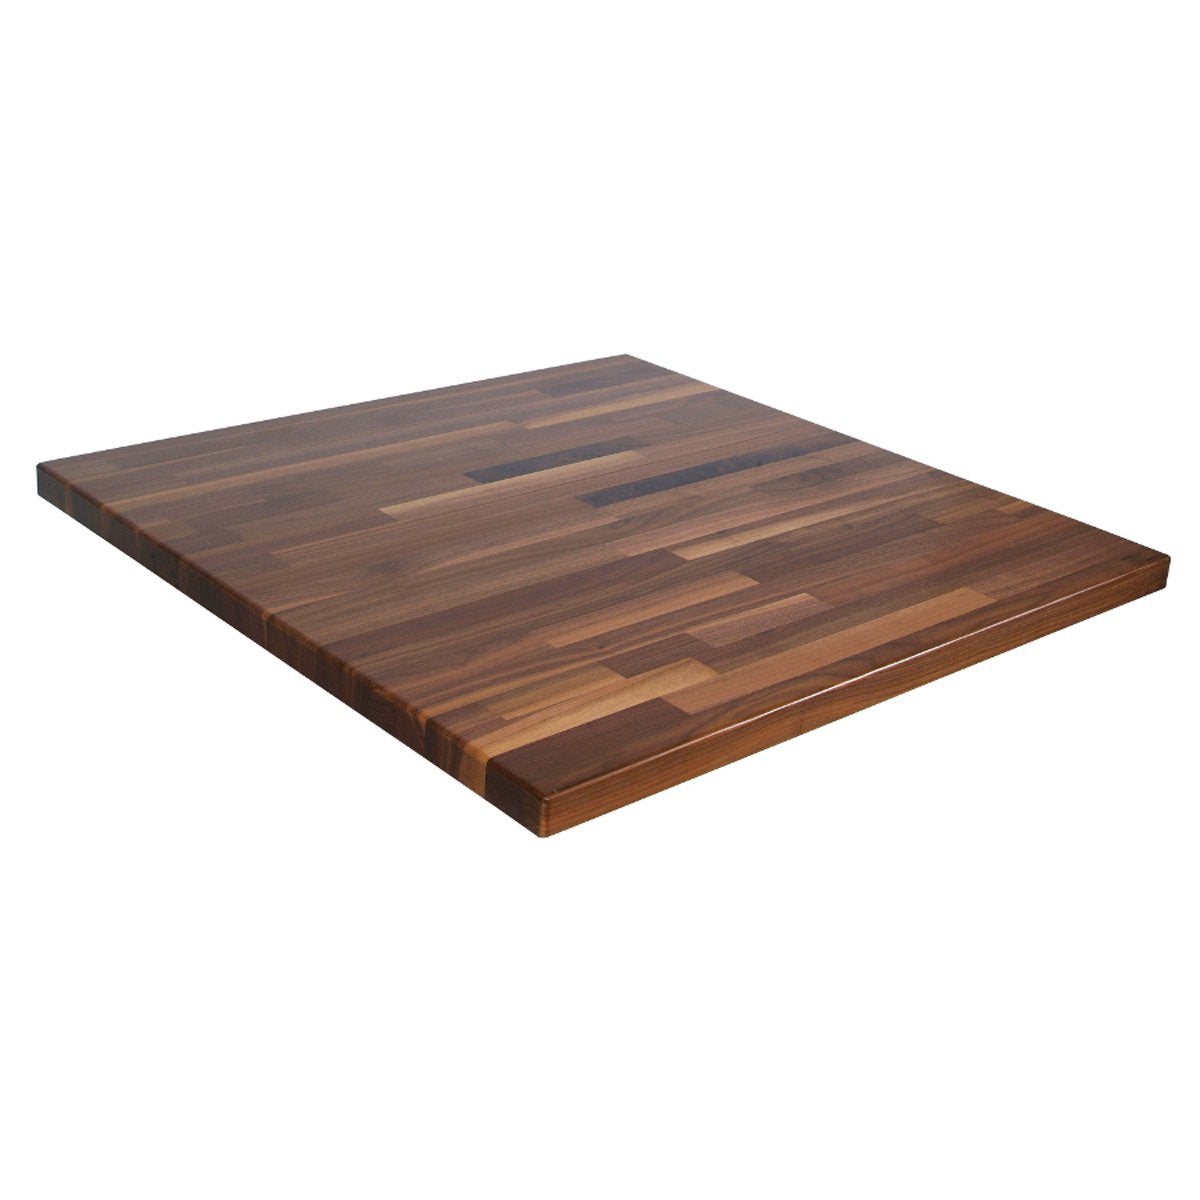 John Boos WALKCT-BL6030-O Blended Walnut Island Top with Oil Finish, 1.5" Thickness, 60" x 30"